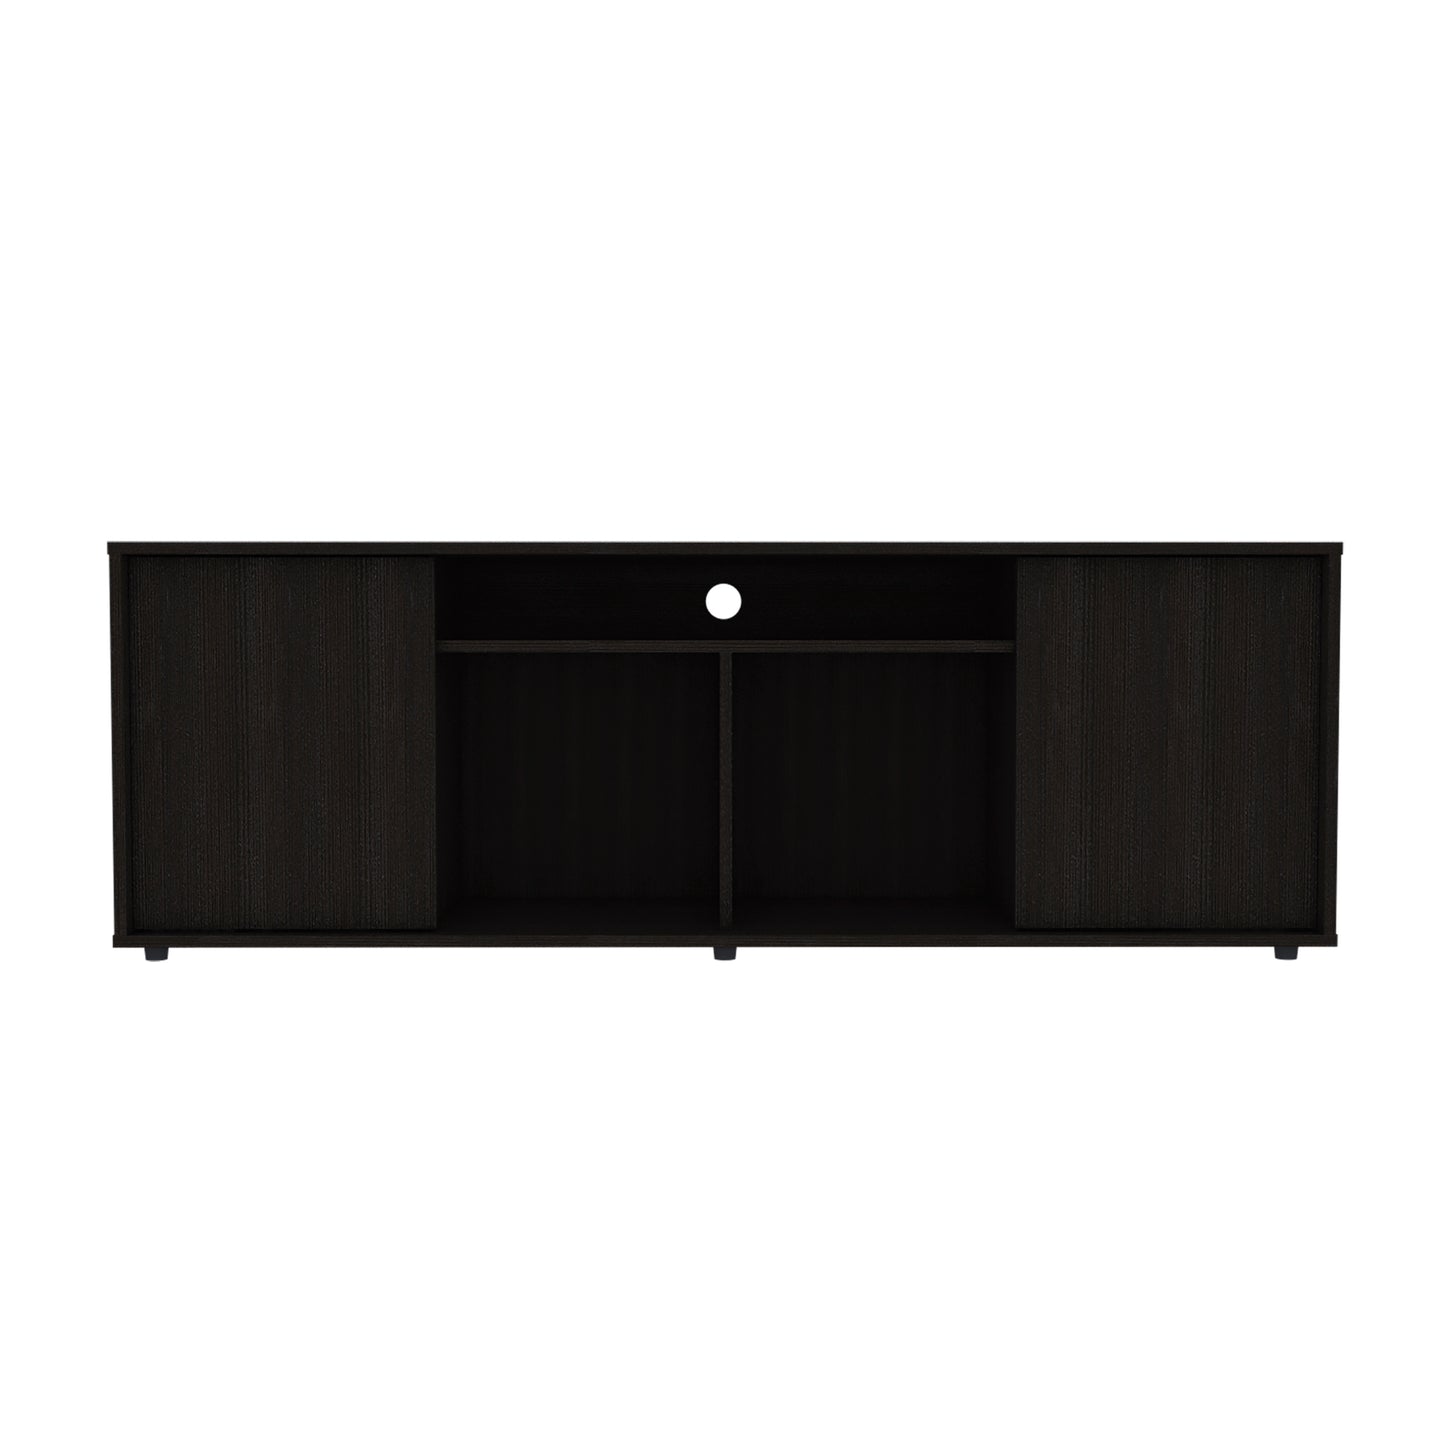 Prana Tv Stand fot TV´s up 60" Four Shelves, Two Cabinets With Single Door -Black